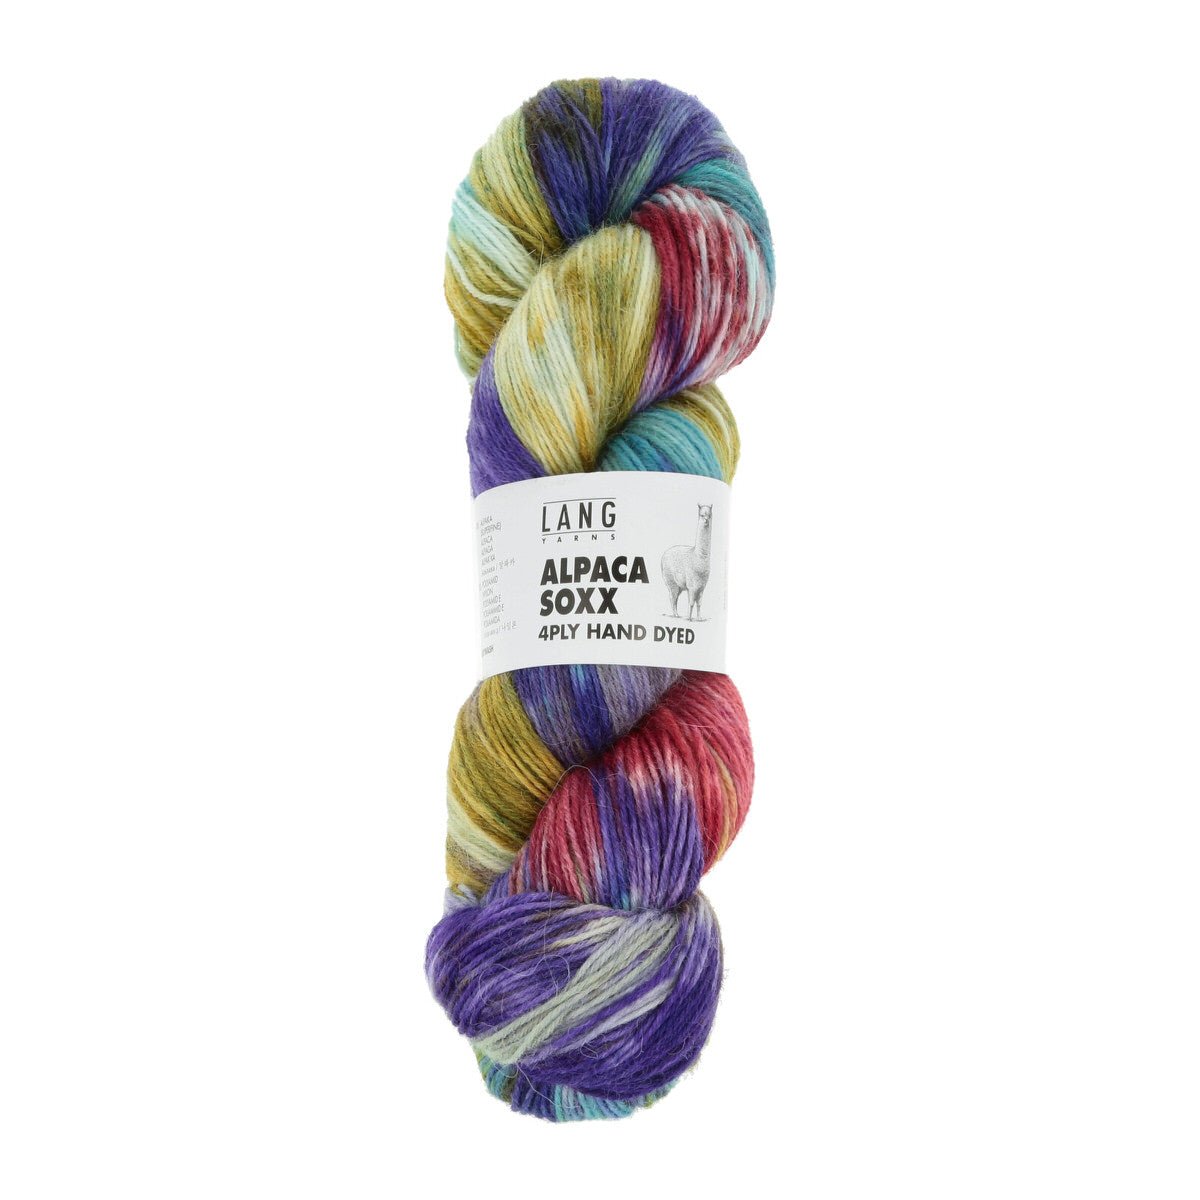 ALPACA SOXX 4-FACH/4-PLY HAND DYED 1132.0004 - Lang